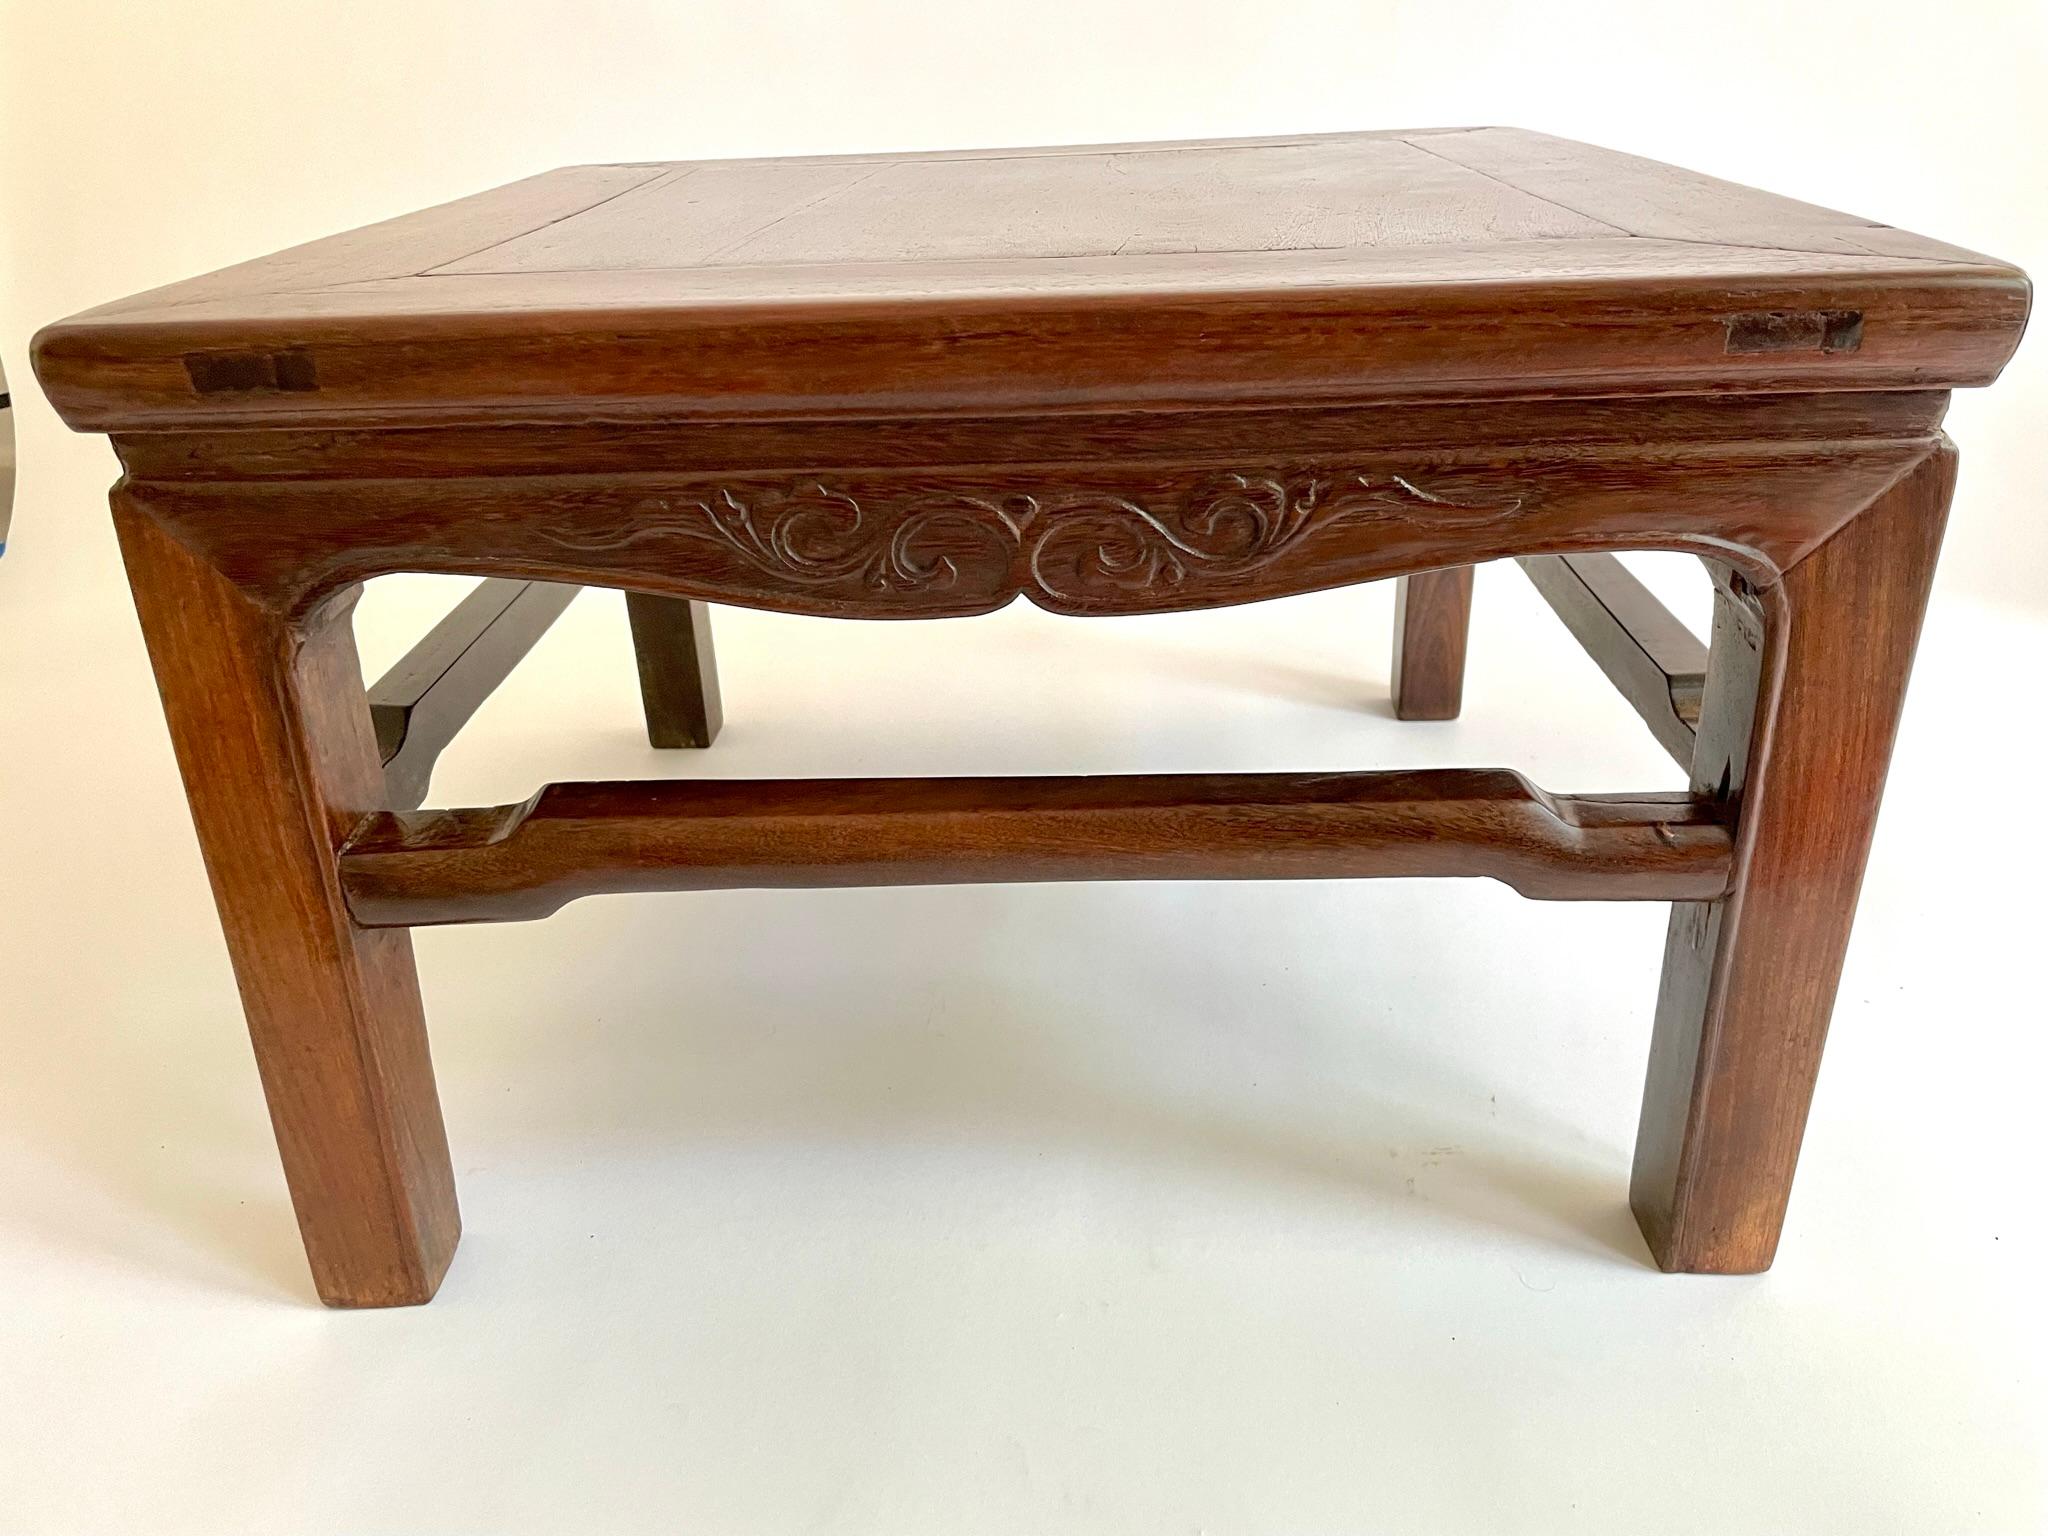 19th Century Chinese Ironwood (Teilimu) Kang Table For Sale 4